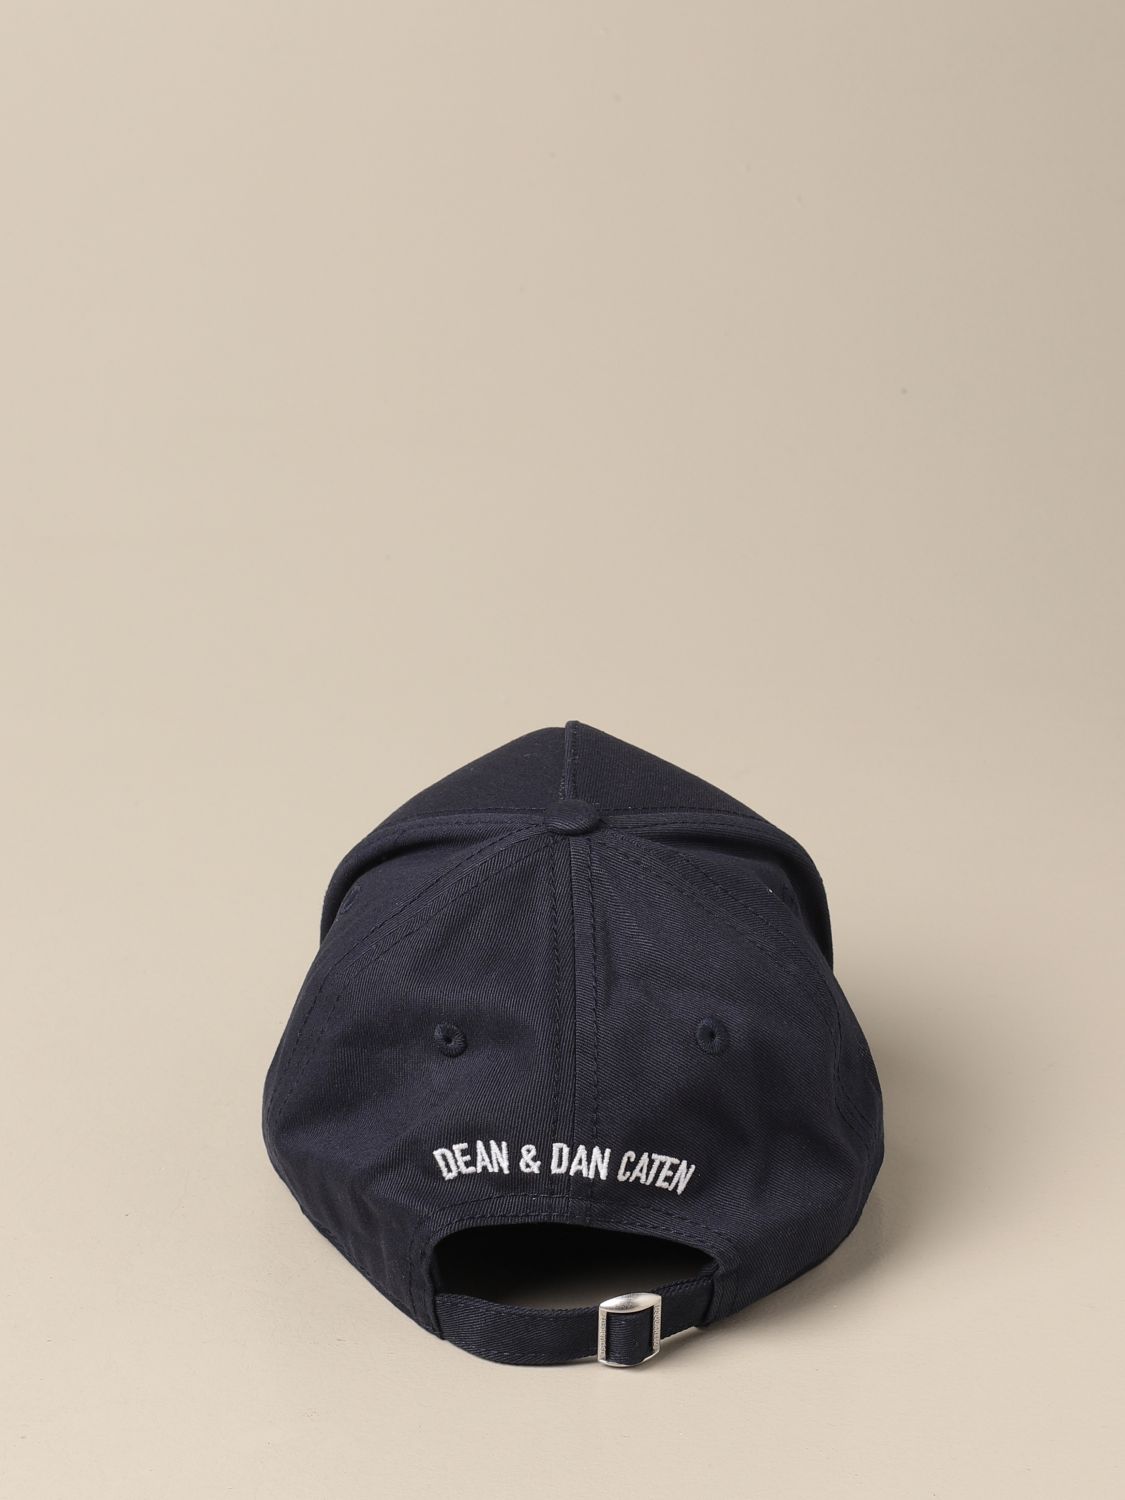 Dsquared2 baseball cap with Icon logo